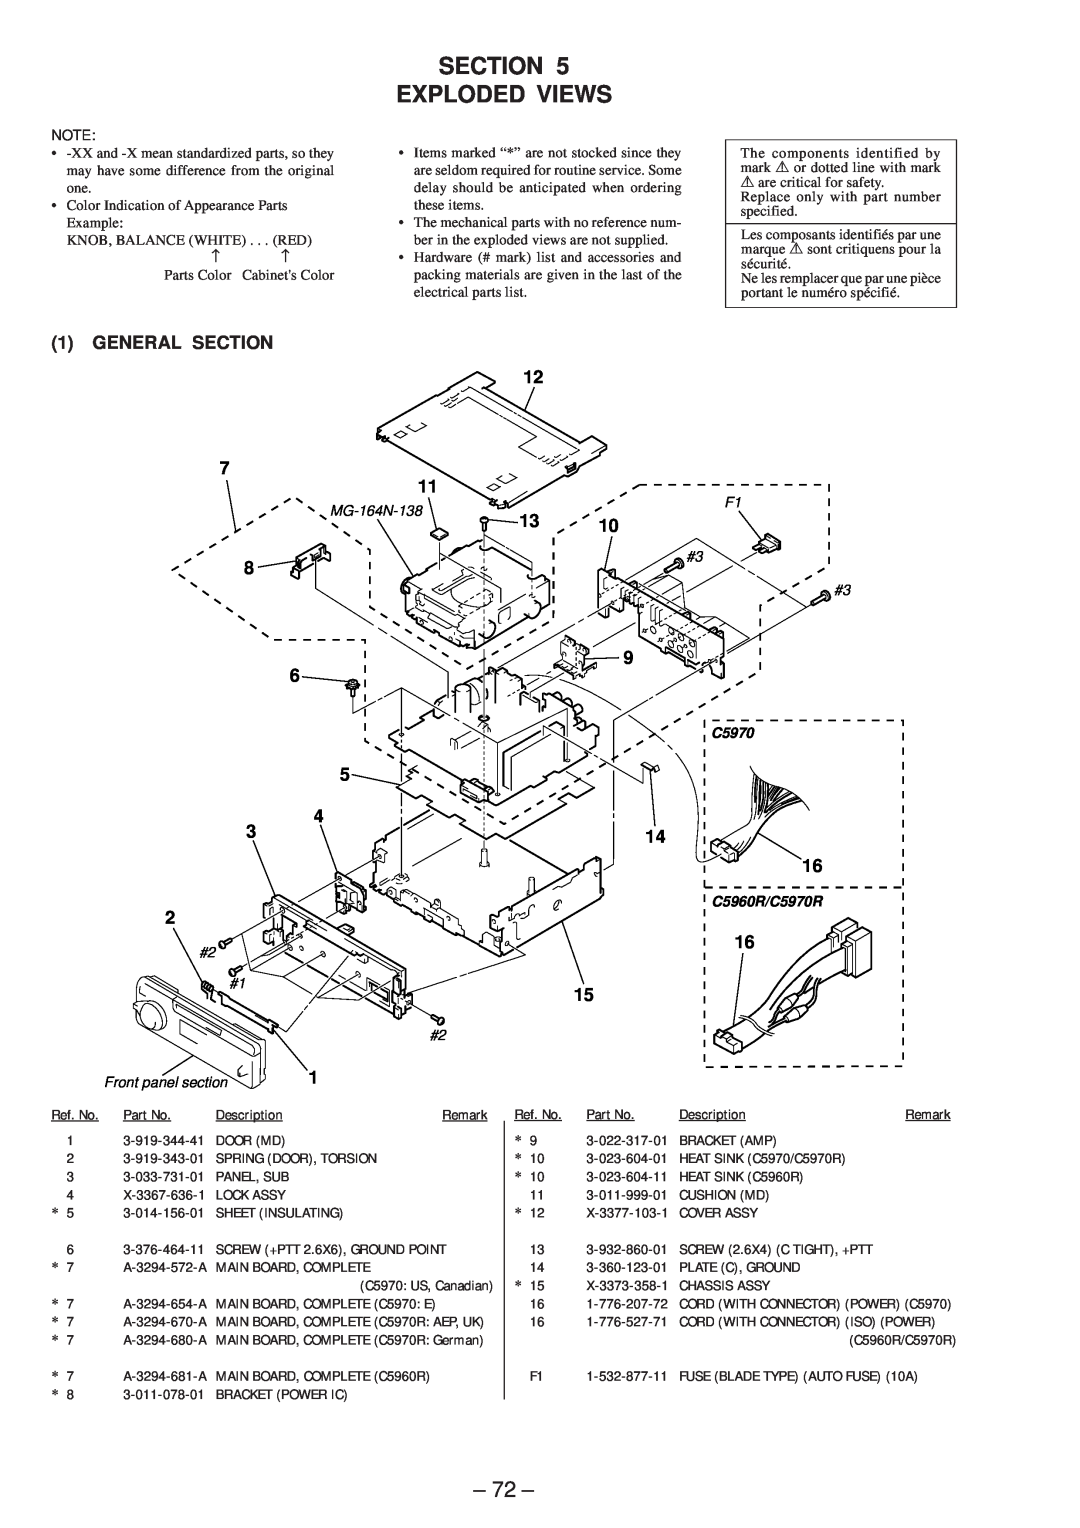 Sony MDX-C5970R service manual Section Exploded Views, 1GENERAL 11, 5 4 3 2, 14 16, 16 15, C5960R/C5970R 